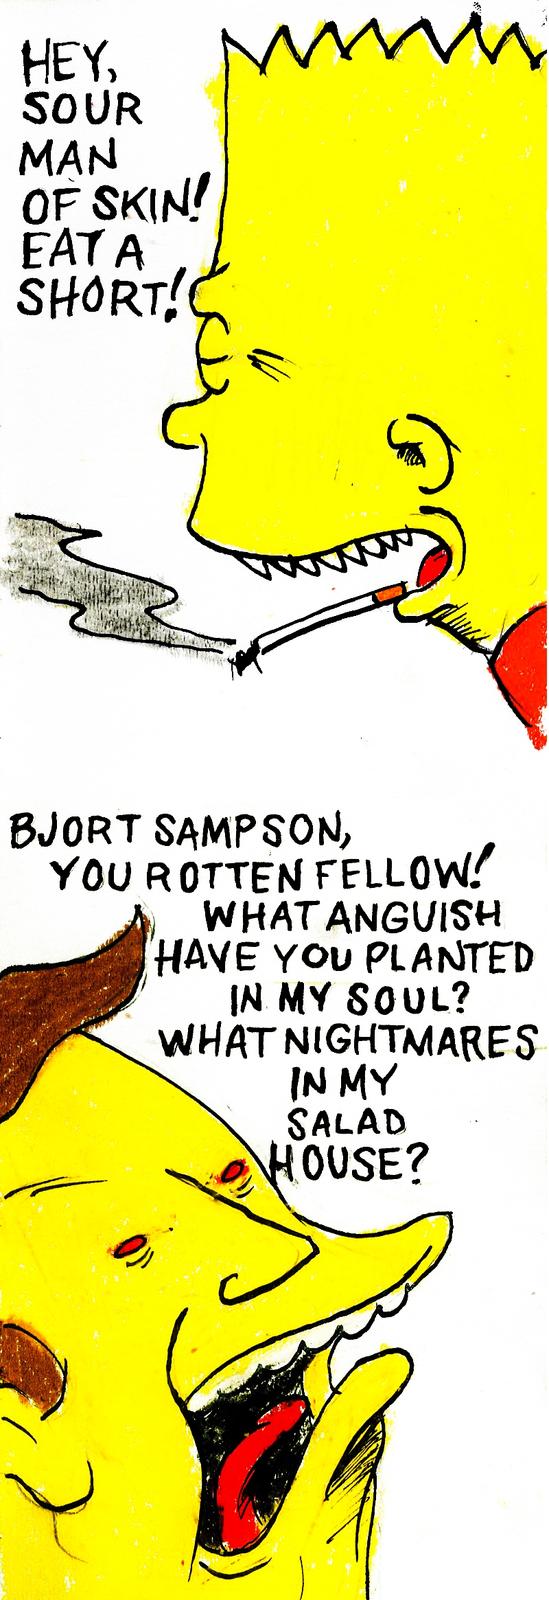 bjort sampson - w Hey, Sour Man Of Skin! Eat A Short!C Bjort Sampson, You Rotten Fellow! What Anguish Have You Planted In My Soul? What Nightmares In My Salad House?